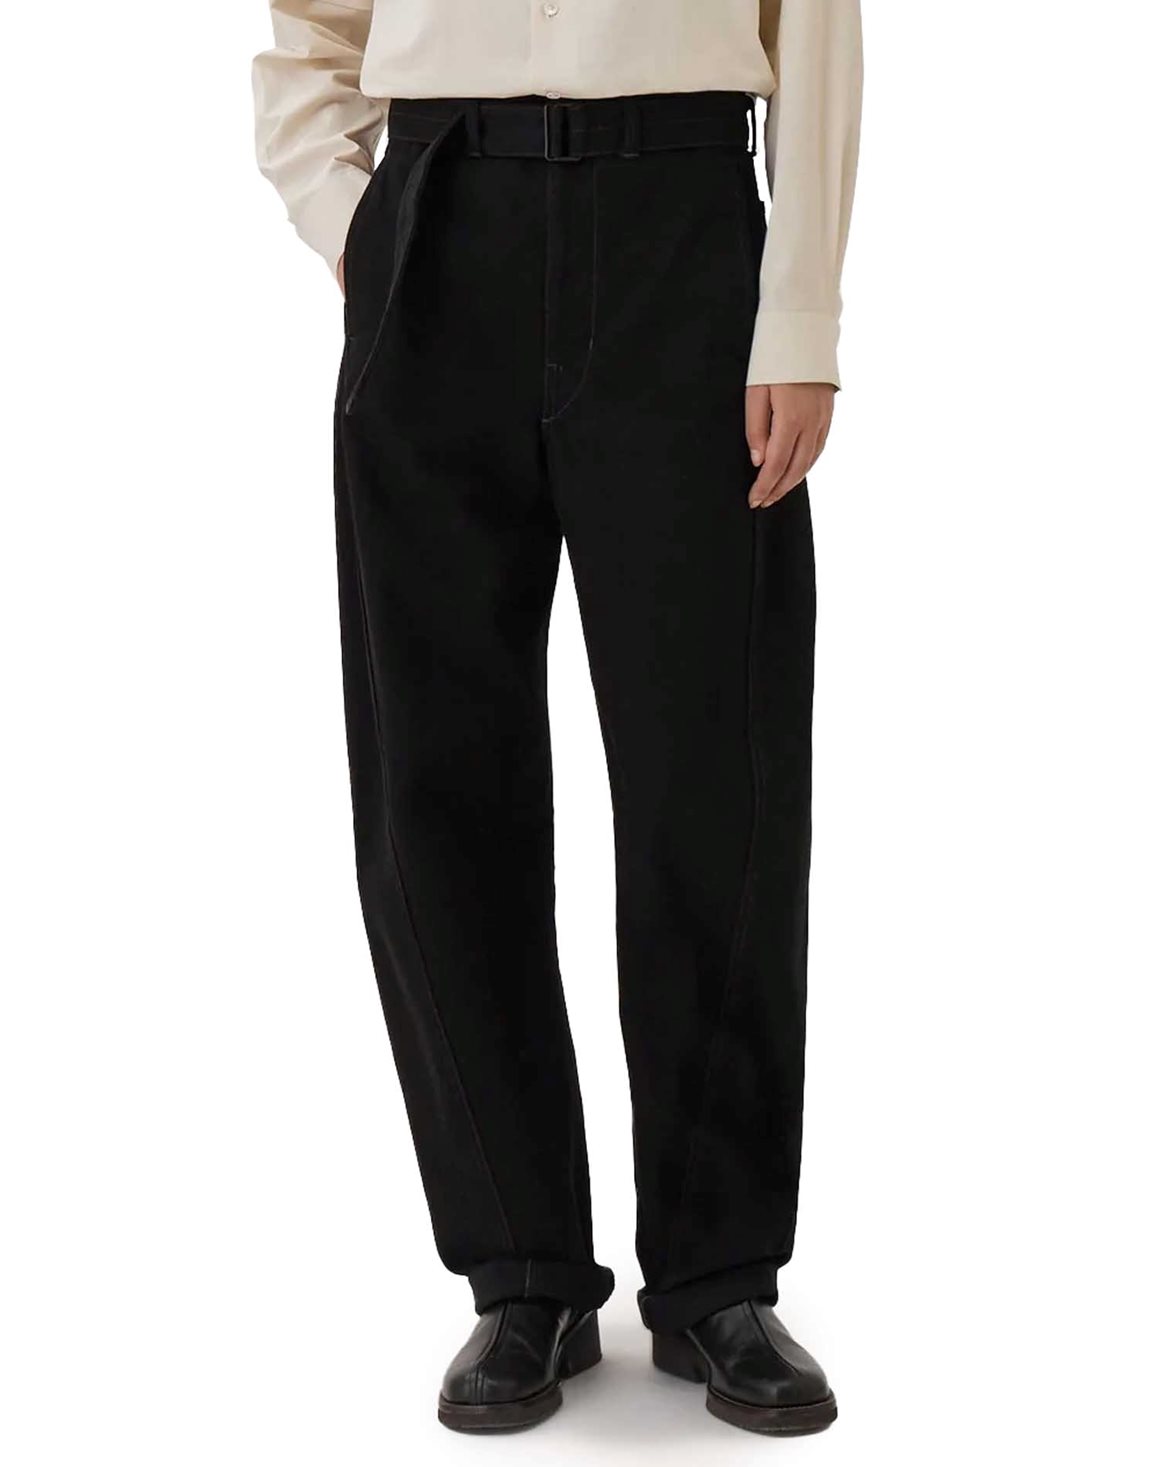 Vallgatan 12 - Lemaire Twisted Belted Pants Black